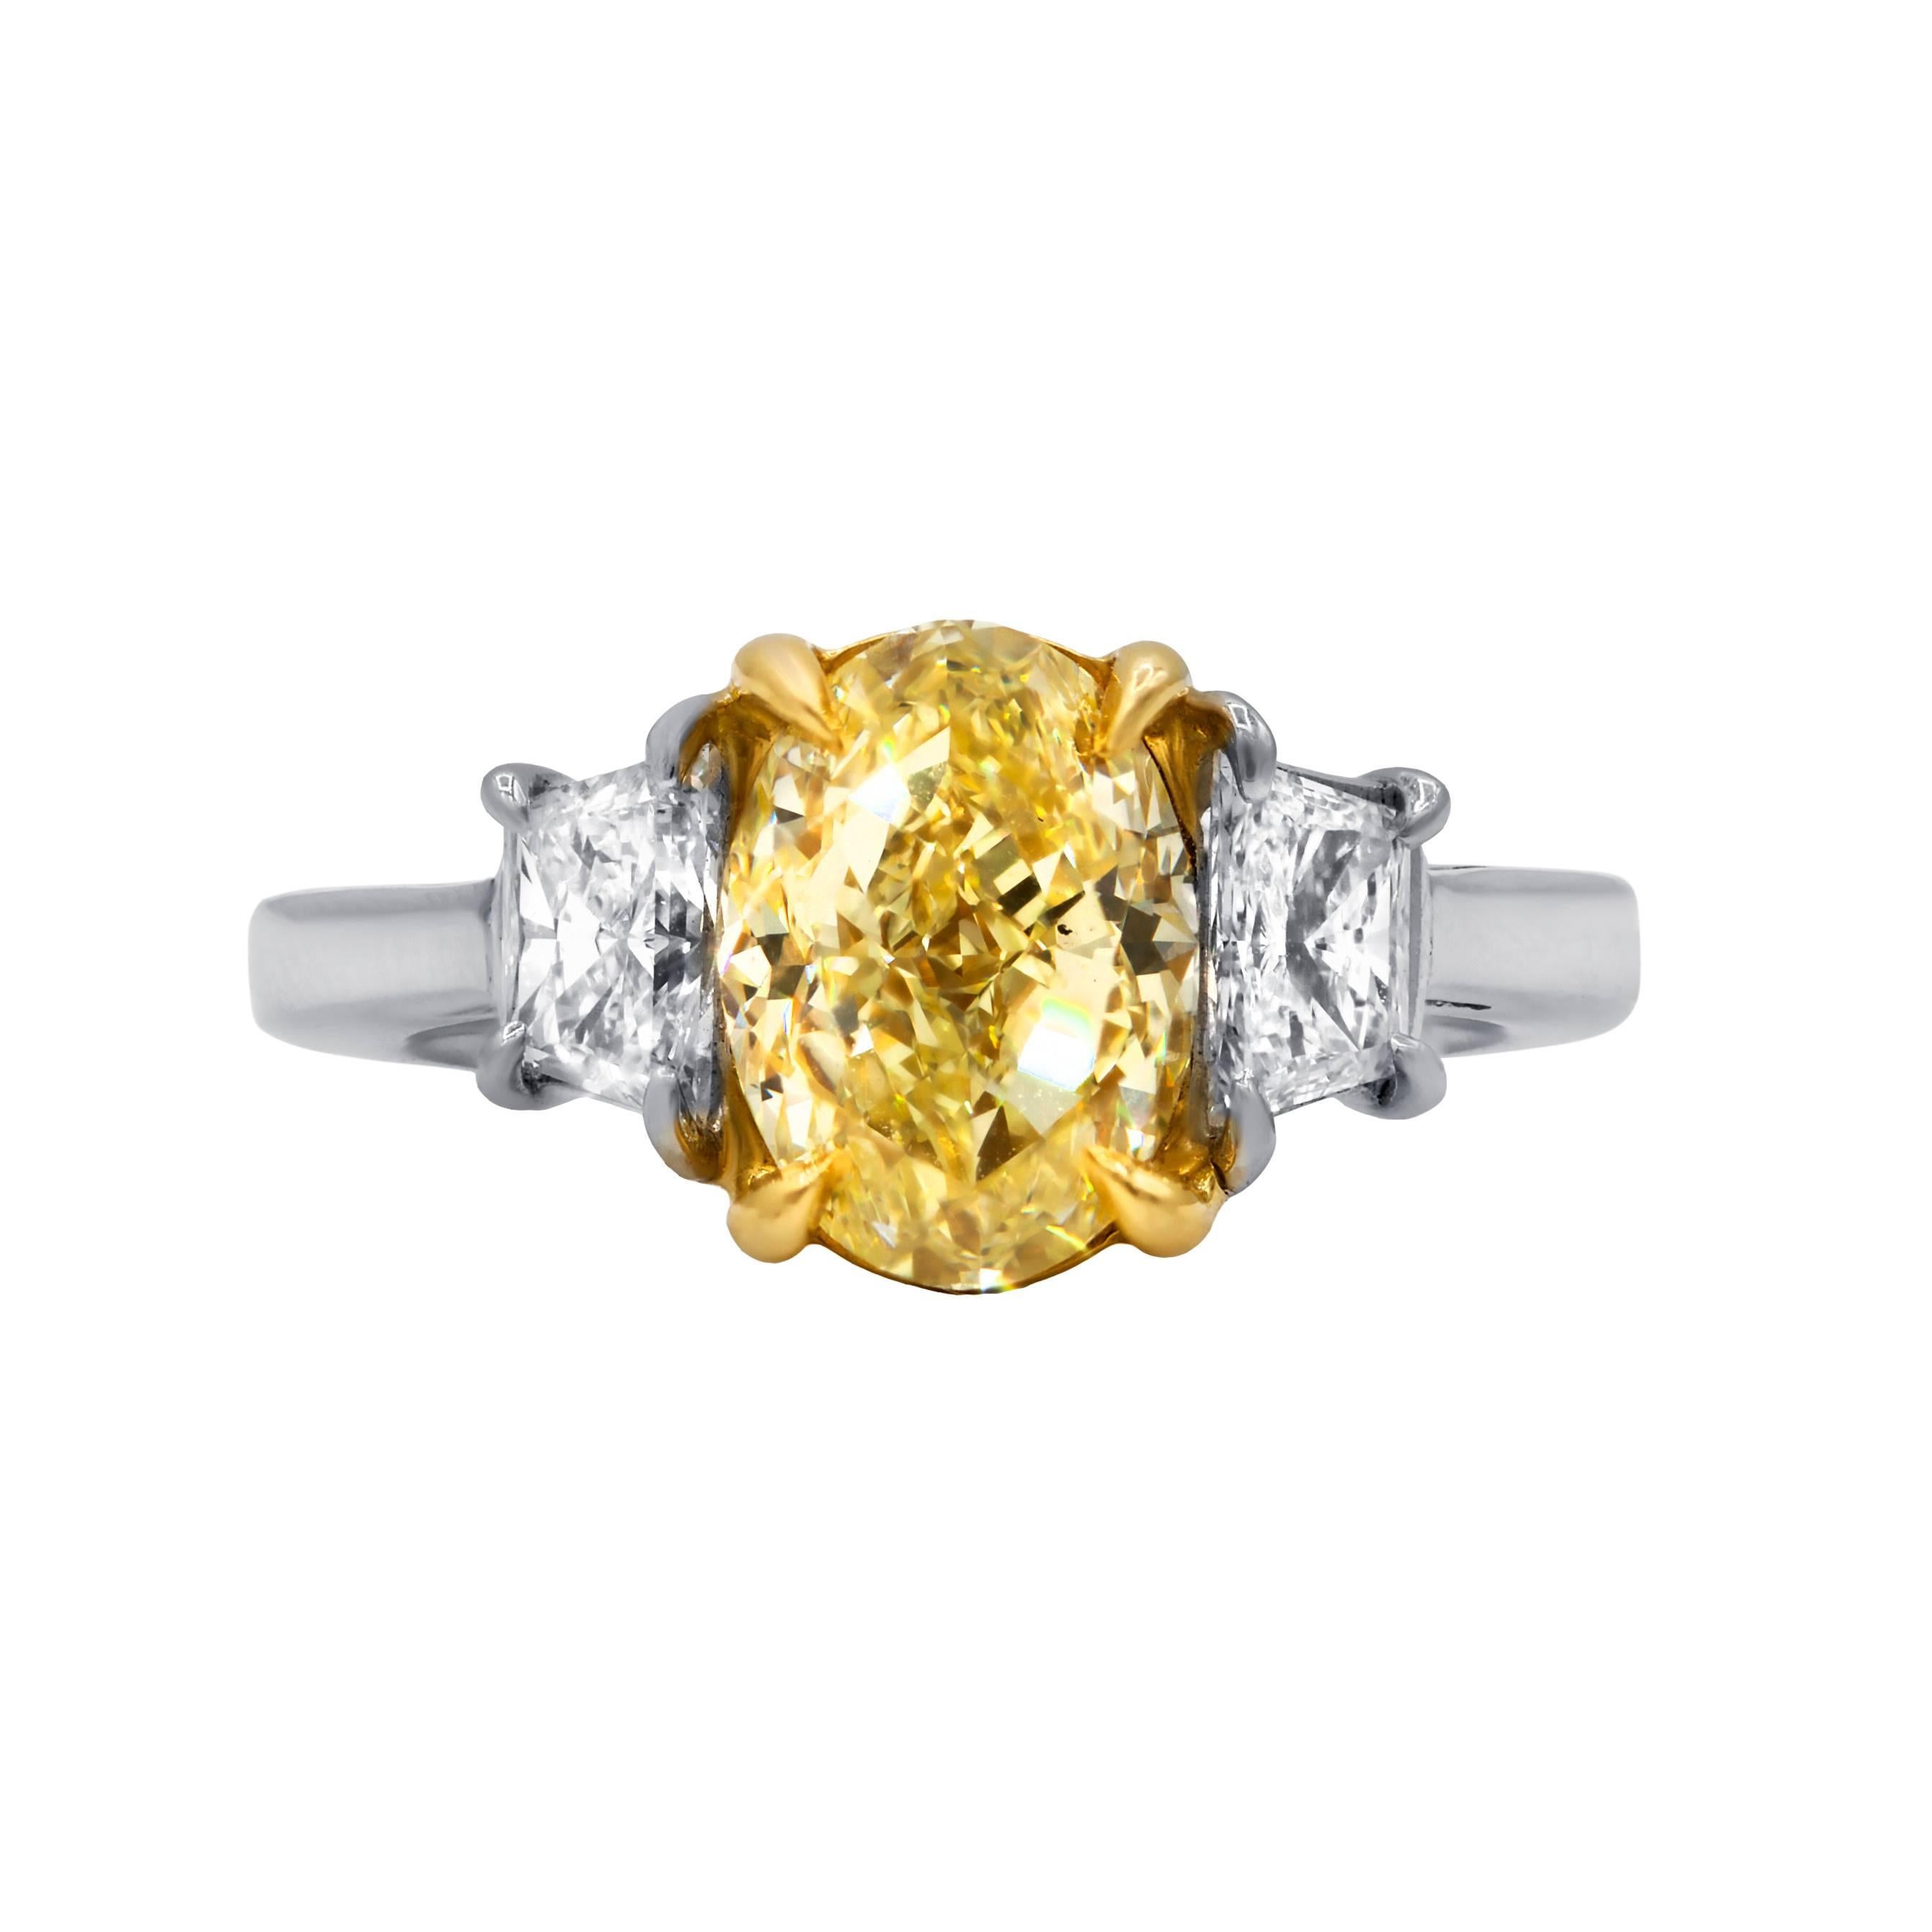 Diana M. Custom  2.58 Carat Fancy Yellow-VS1 Oval Engagement Ring For Sale